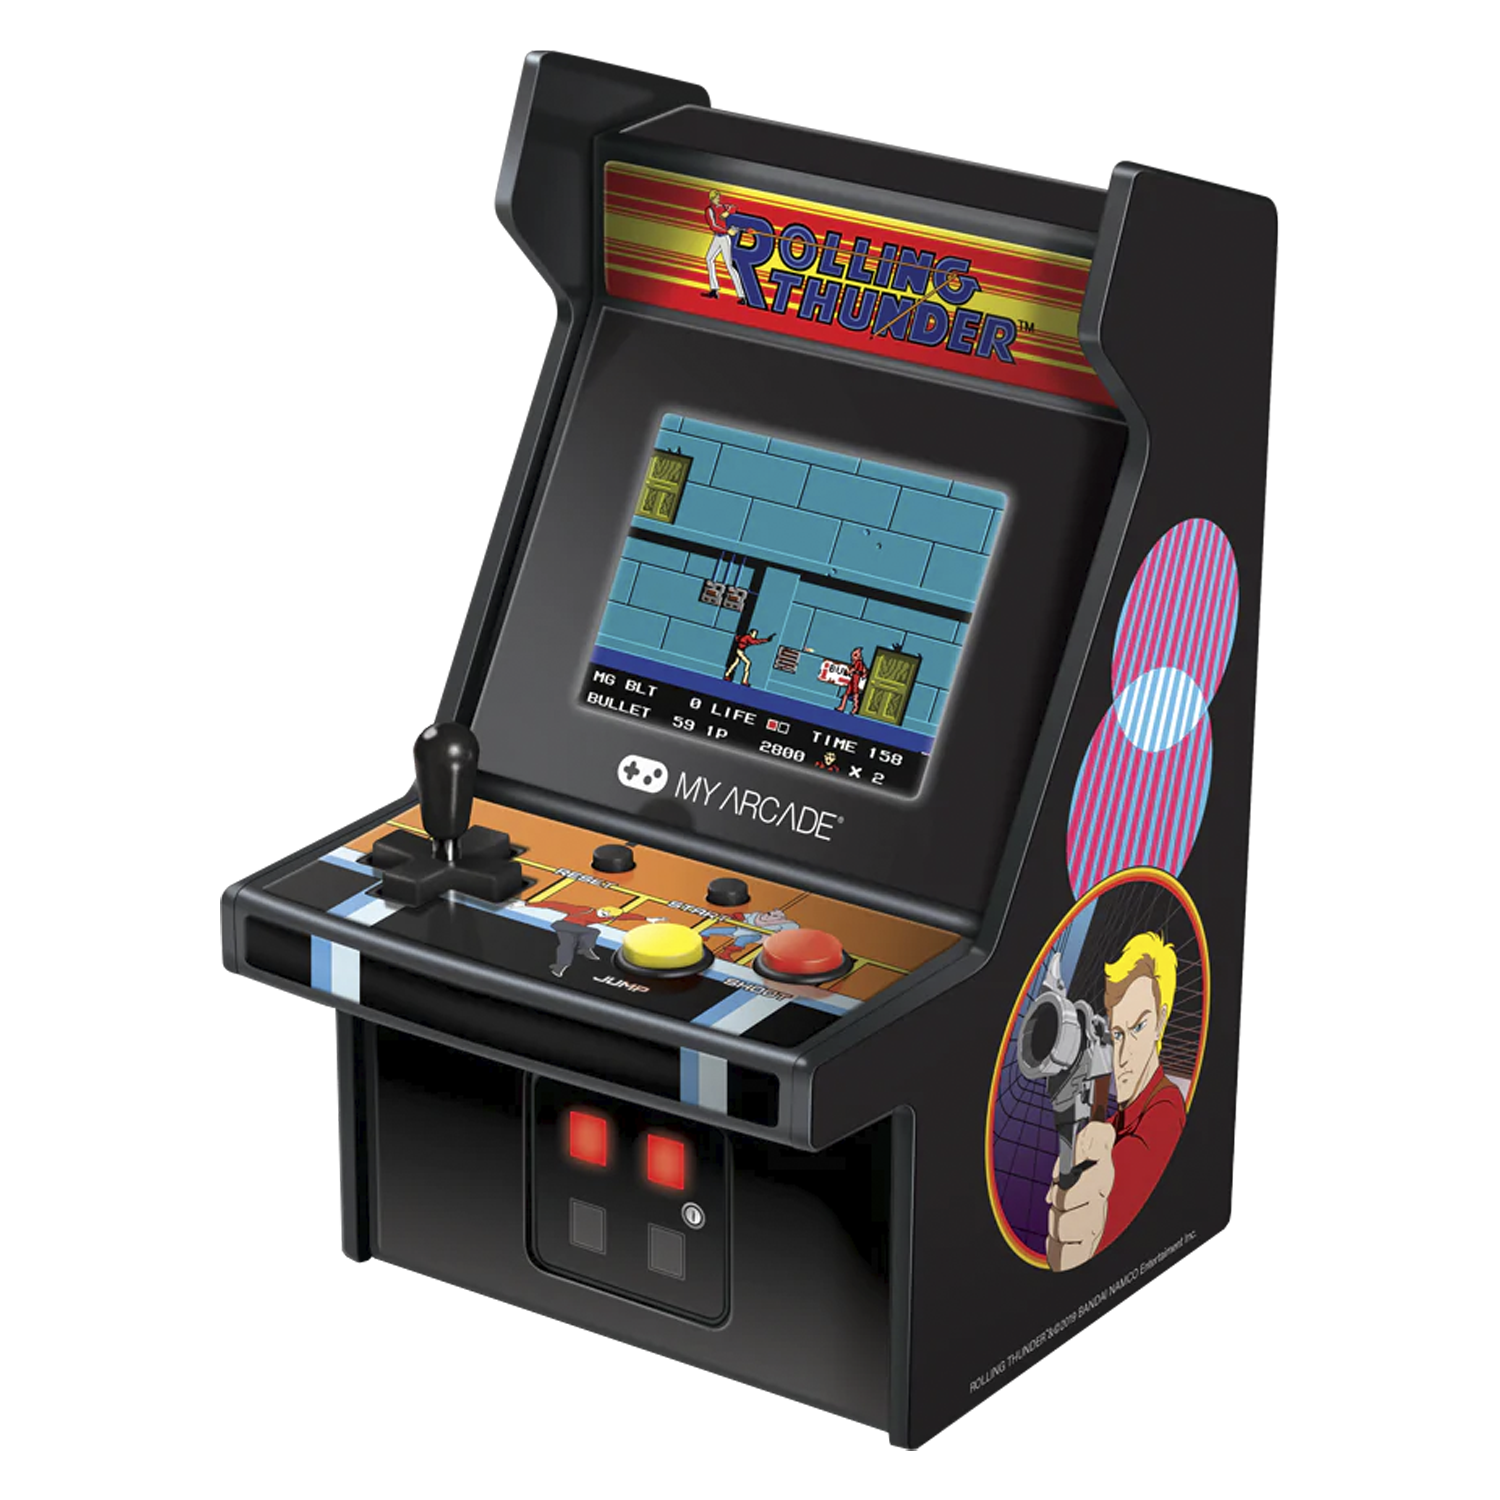 Console Game My Arcade Rolling Thunder Micro Player - DGUNL-3225